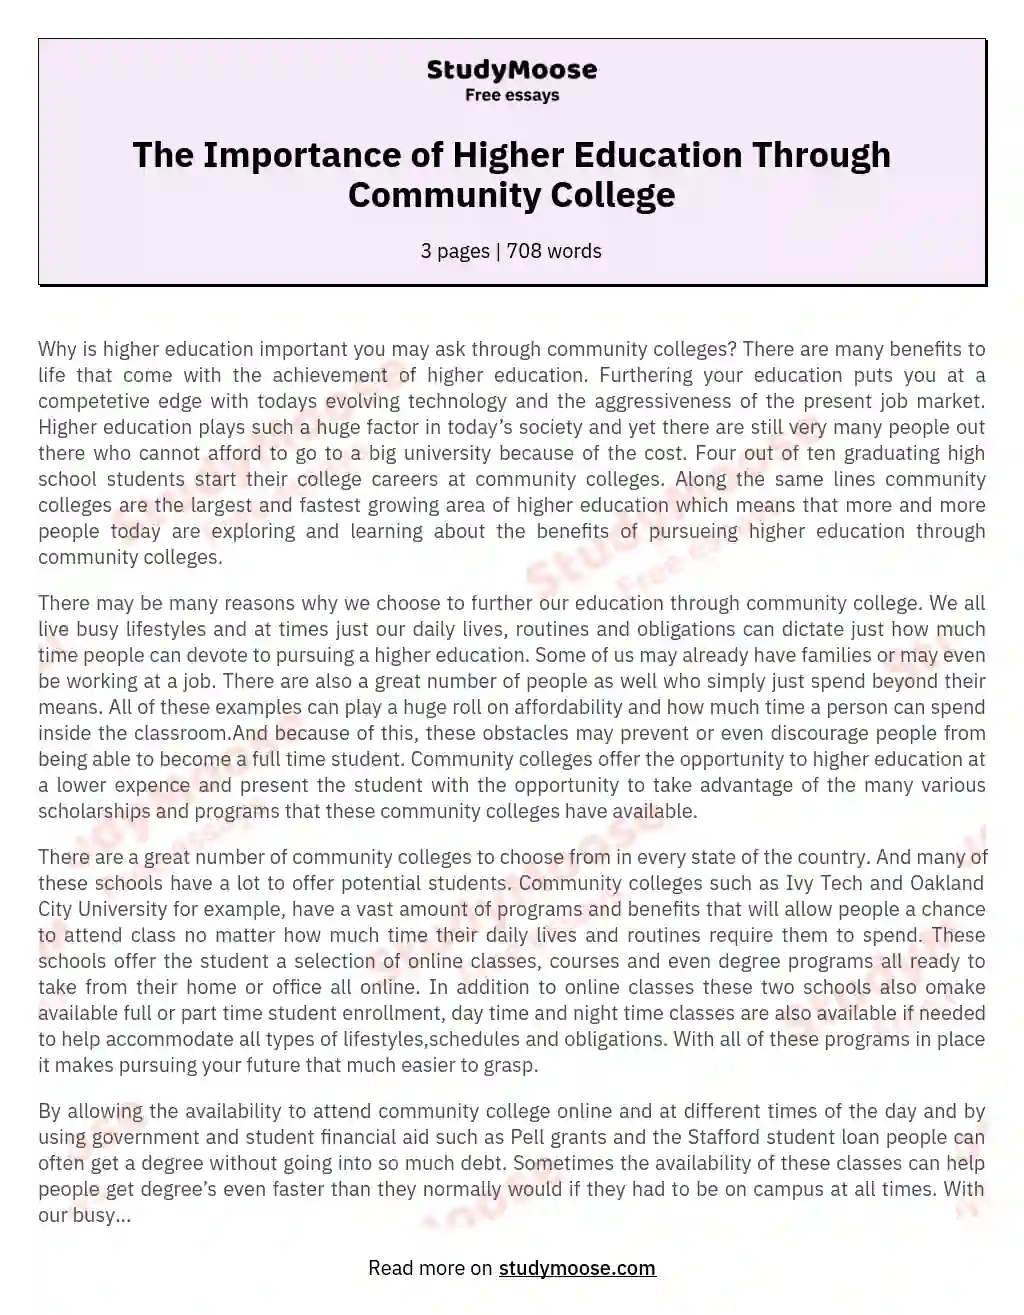 The Importance of Higher Education Through Community College essay